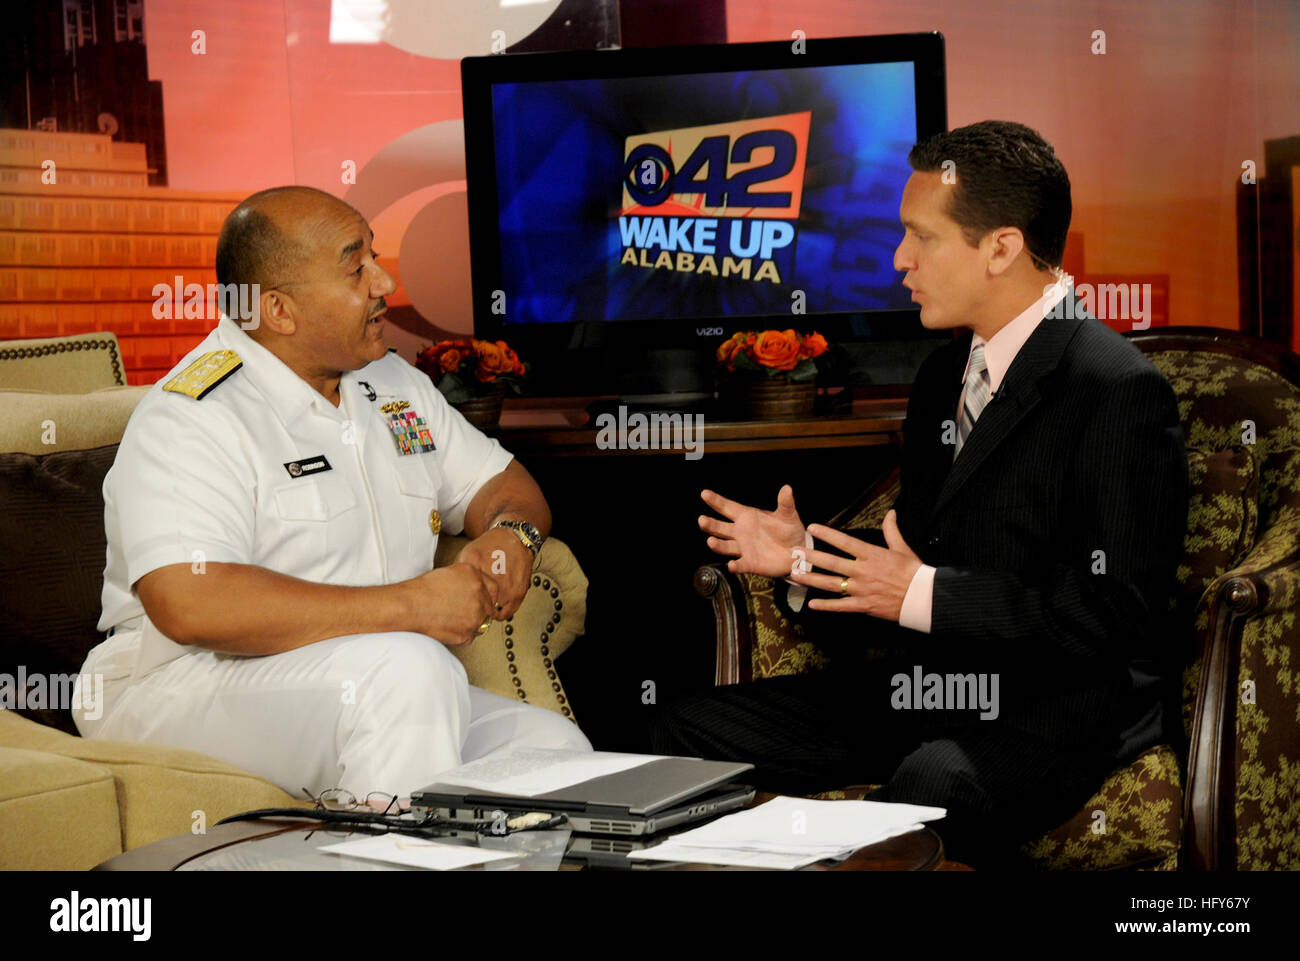 100505-N-5208T-001 BIRMINGHAM, Ala. (May 5, 2010) Vice Adm. Adam M. Robinson Jr., Surgeon General of the Navy and Chief of the Navy Bureau of Medicine and Surgery, delivers remarks about Birmingham Navy Week on the Wake Up Alabama TV morning show. This event is one of many events held in conjunction with Birmingham Navy Week. Birmingham Navy Week is one of 20 Navy Weeks planned across America in 2010. Navy Weeks are designed to show Americans the investment they have made in their Navy and increase awareness in cities that do not have a significant Navy presence. (U.S. Navy photo by Mass Commu Stock Photo